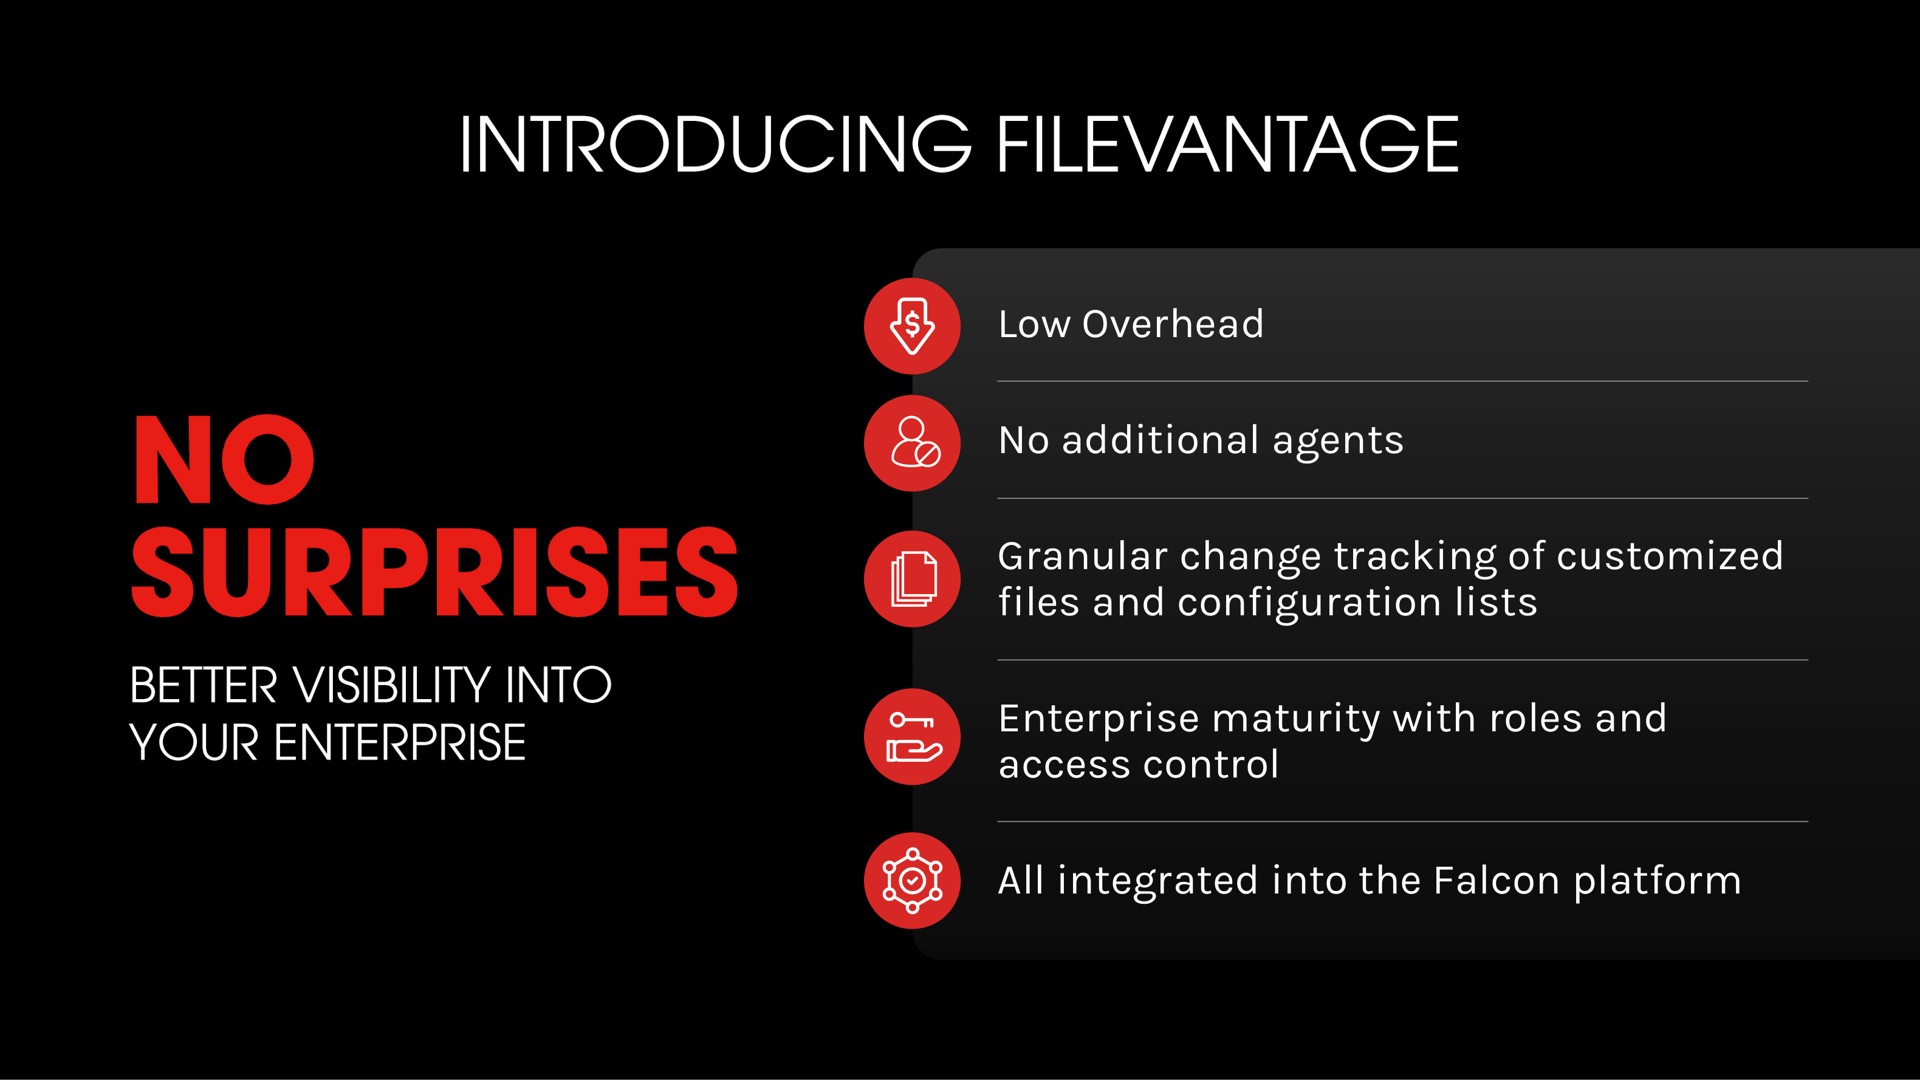 low overhead no additional agents granular change tracking of files and configuration lists enterprise maturity with roles and access control all integrated into the falcon platform introducing better visibility | Crowdstrike